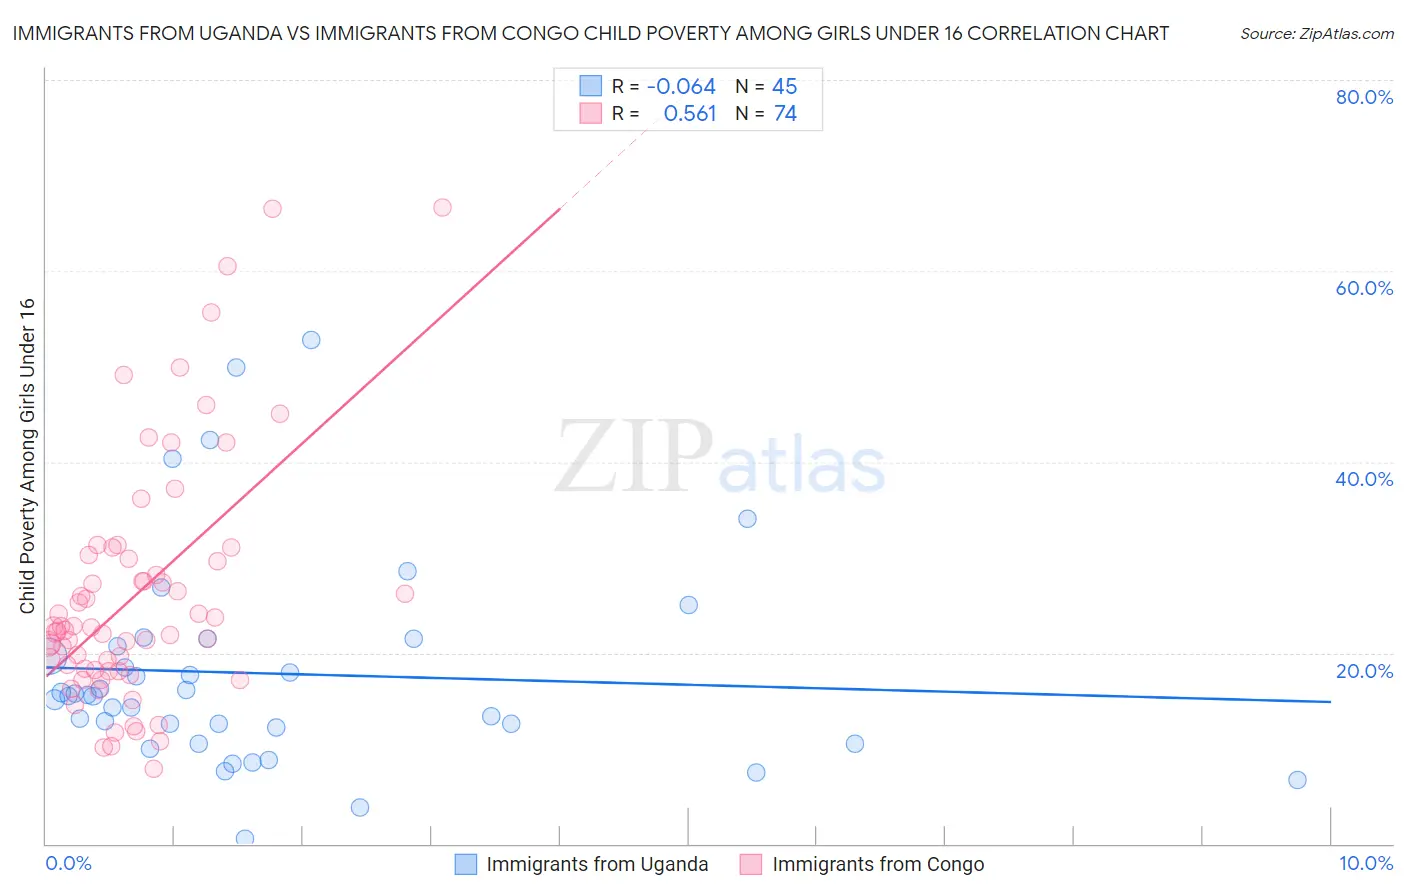 Immigrants from Uganda vs Immigrants from Congo Child Poverty Among Girls Under 16